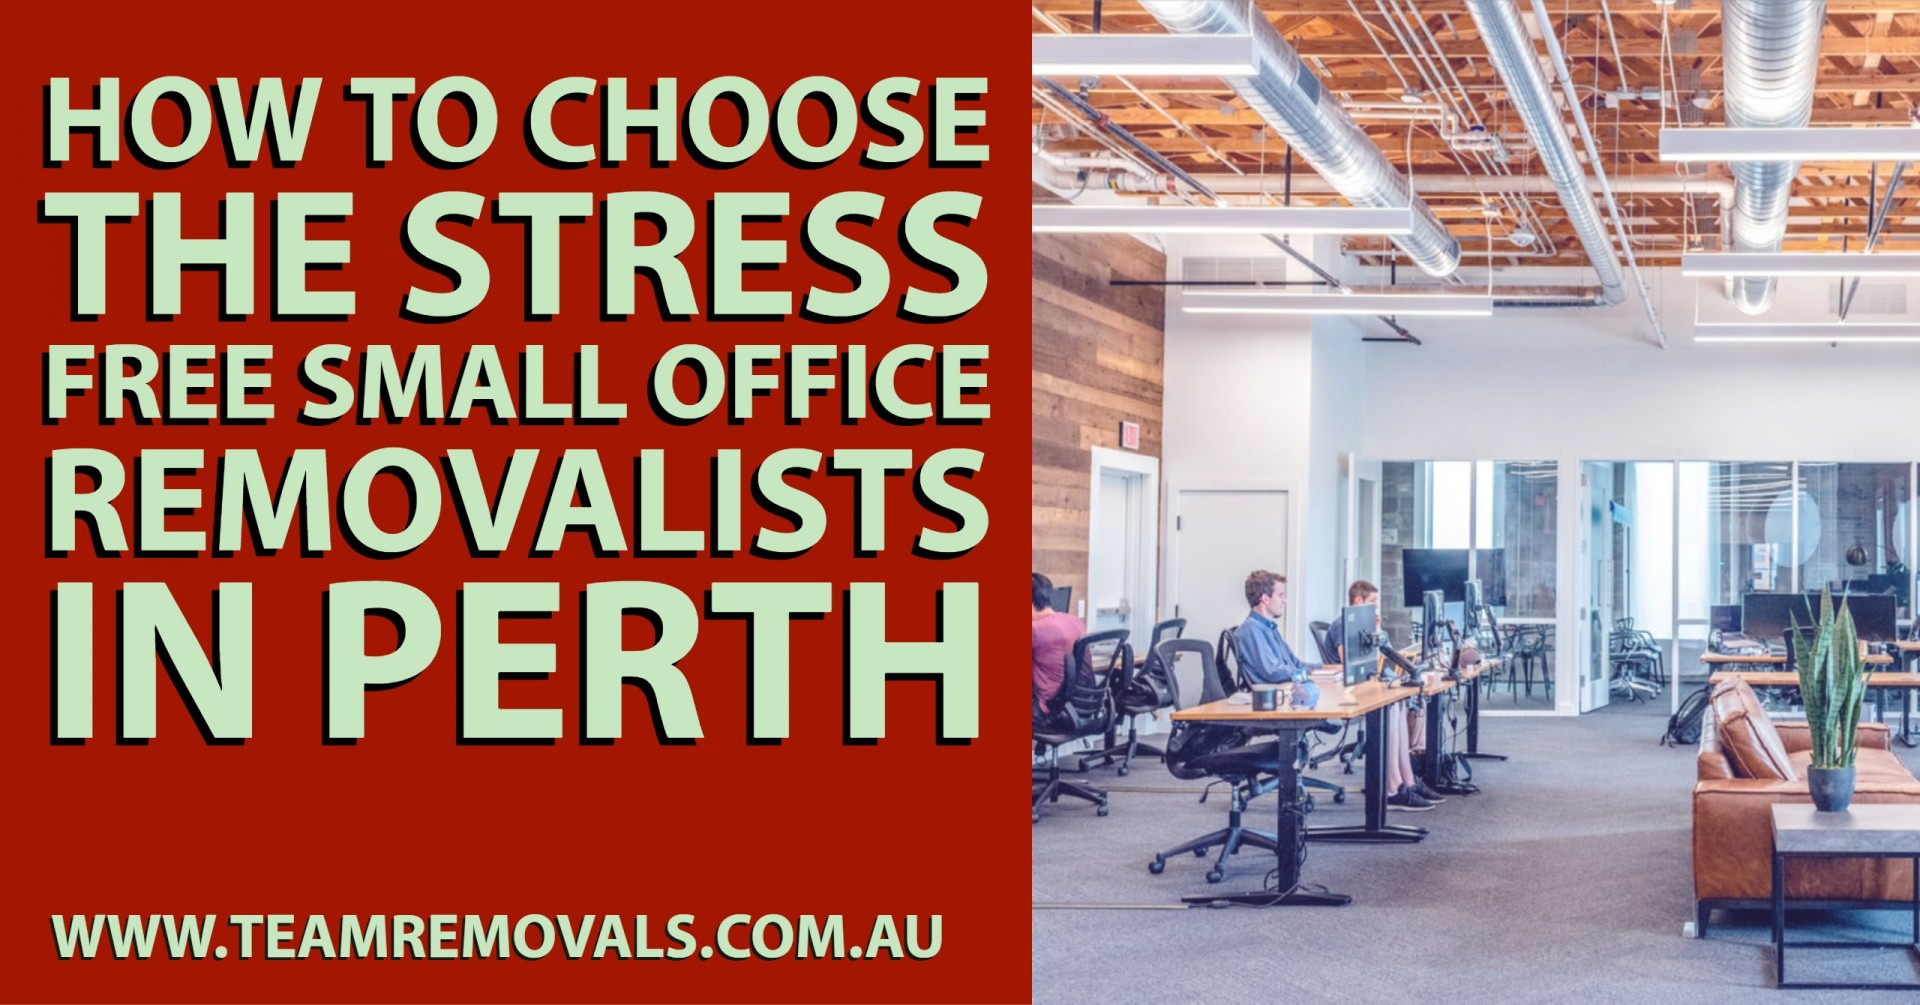 How to Choose the Stress Free Small Office Removalists in Perth